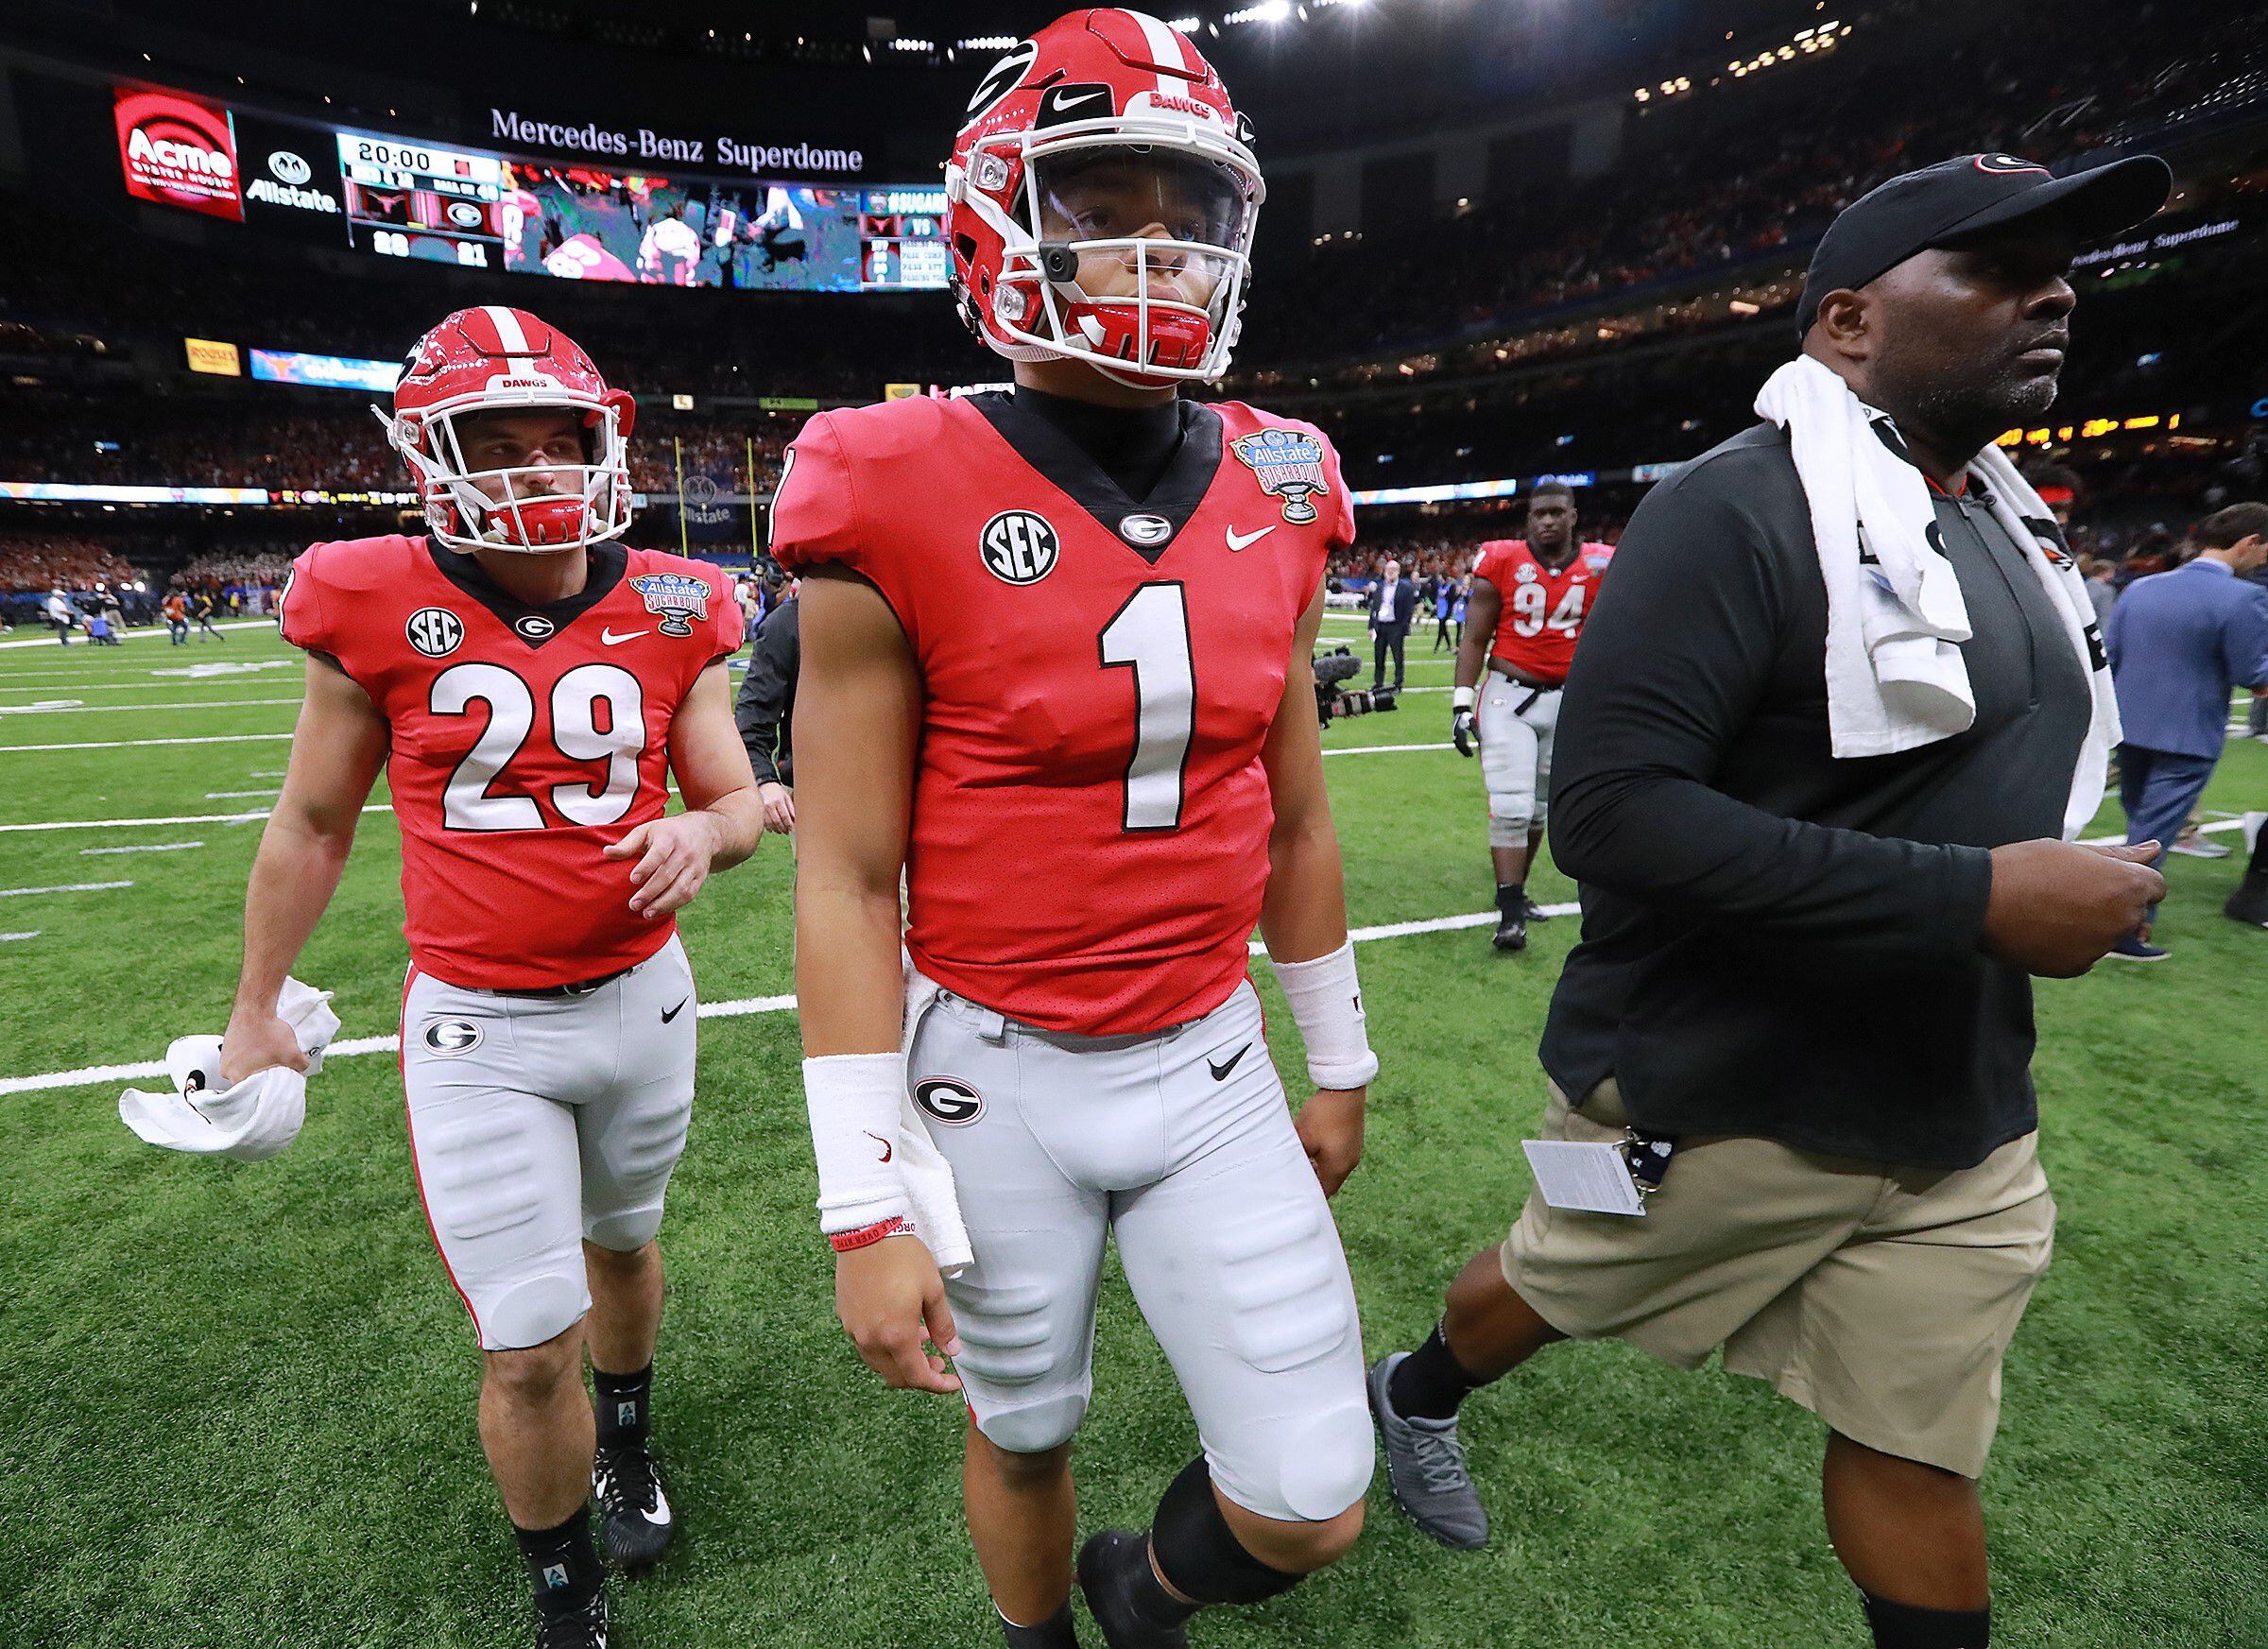 Georgia's Justin Fields may transfer, could possibly play next season